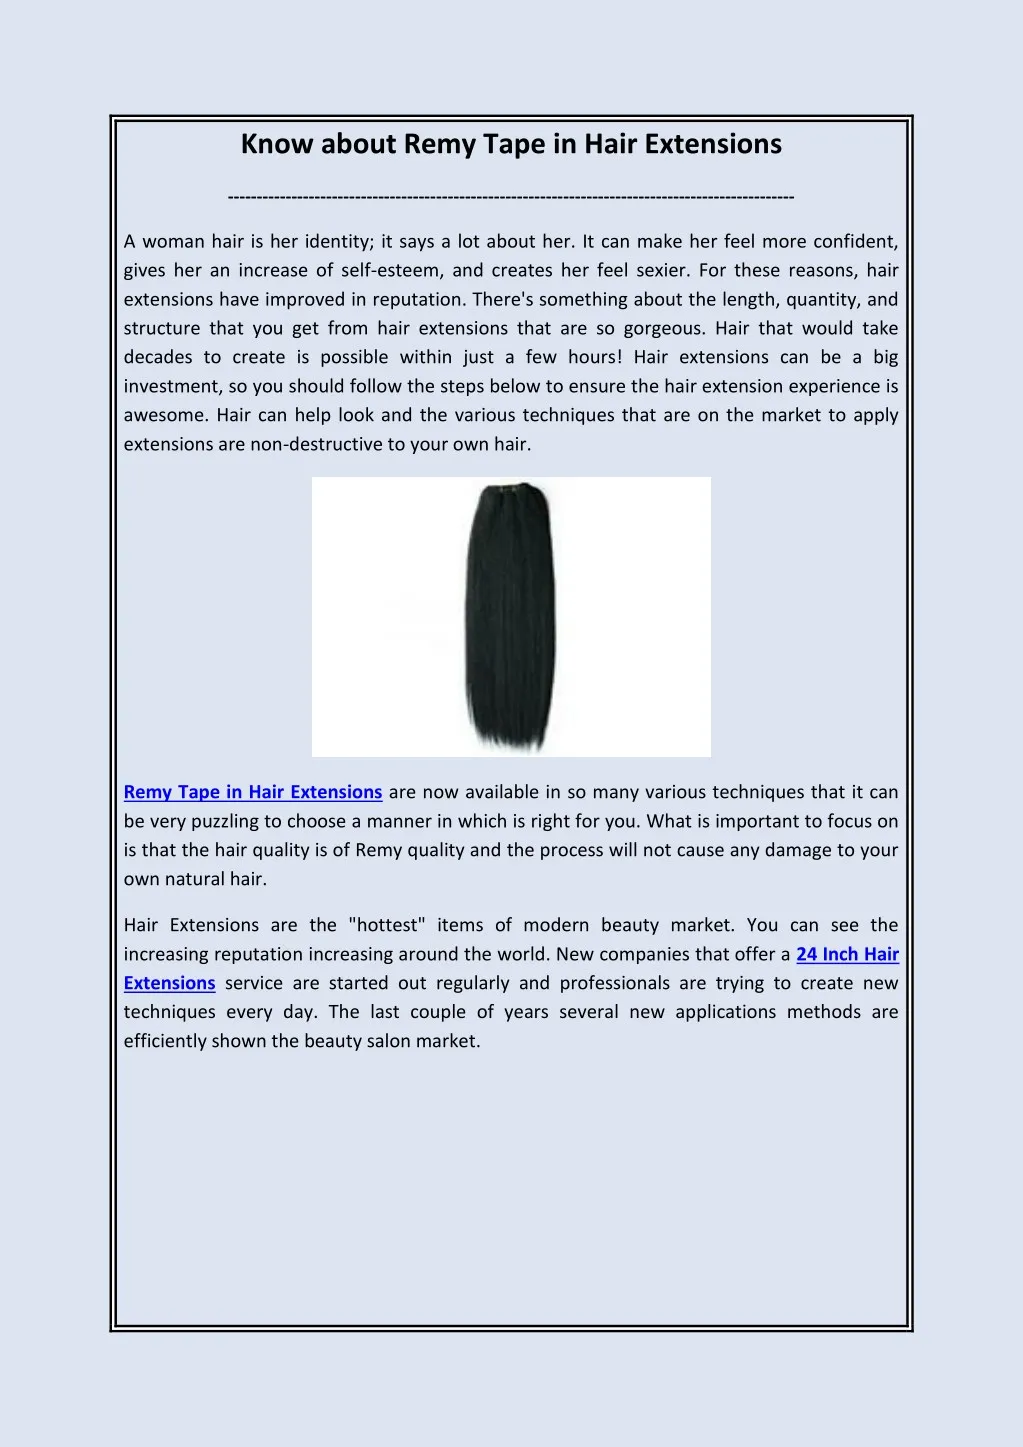 know about remy tape in hair extensions